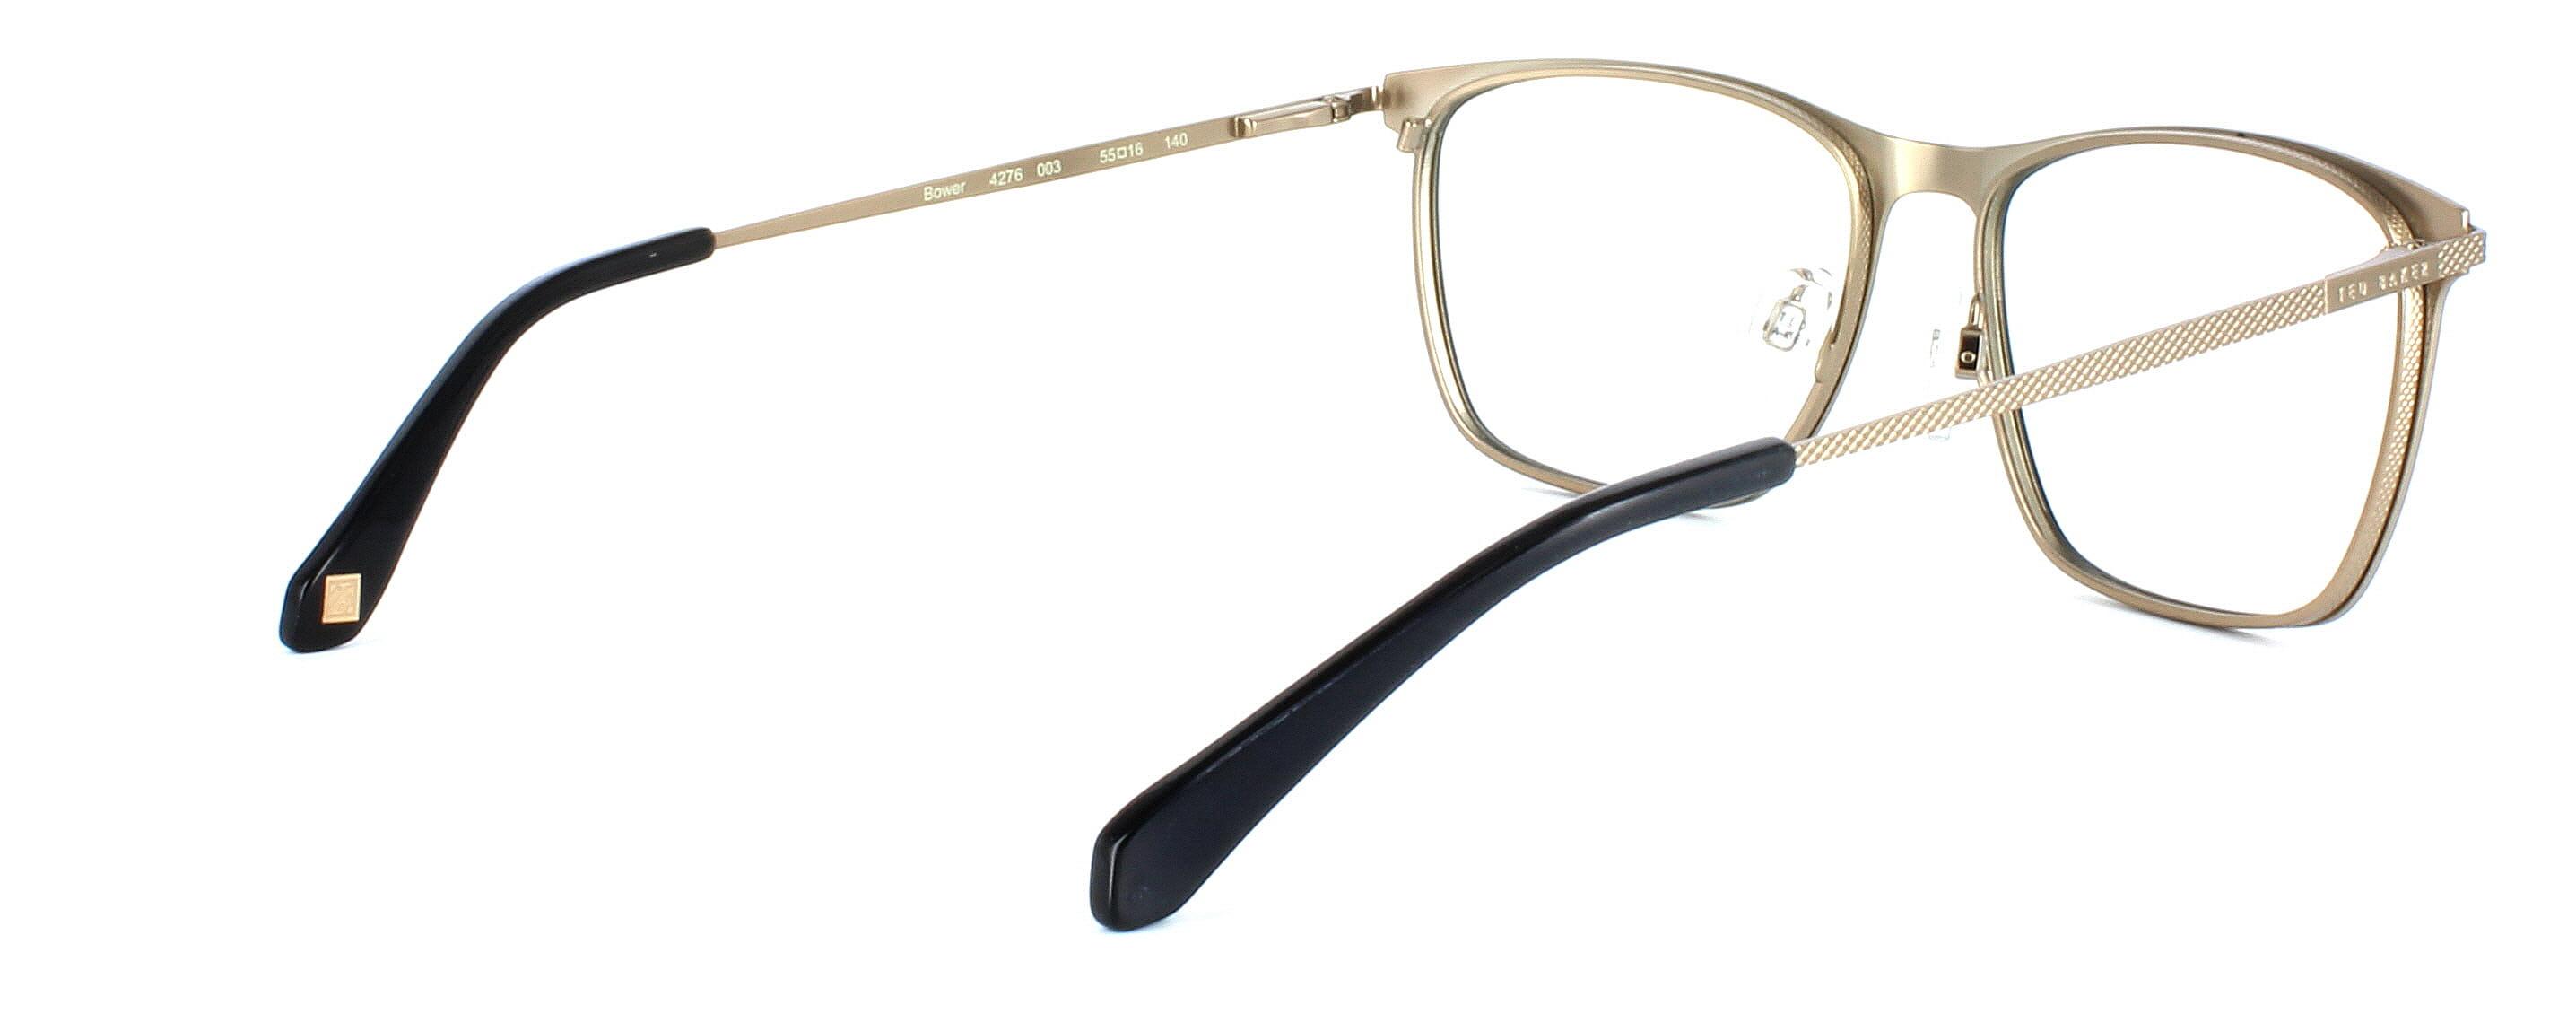 Ted Baker 4276 in black and gold. This is a metal unisex designer frame - image view 4